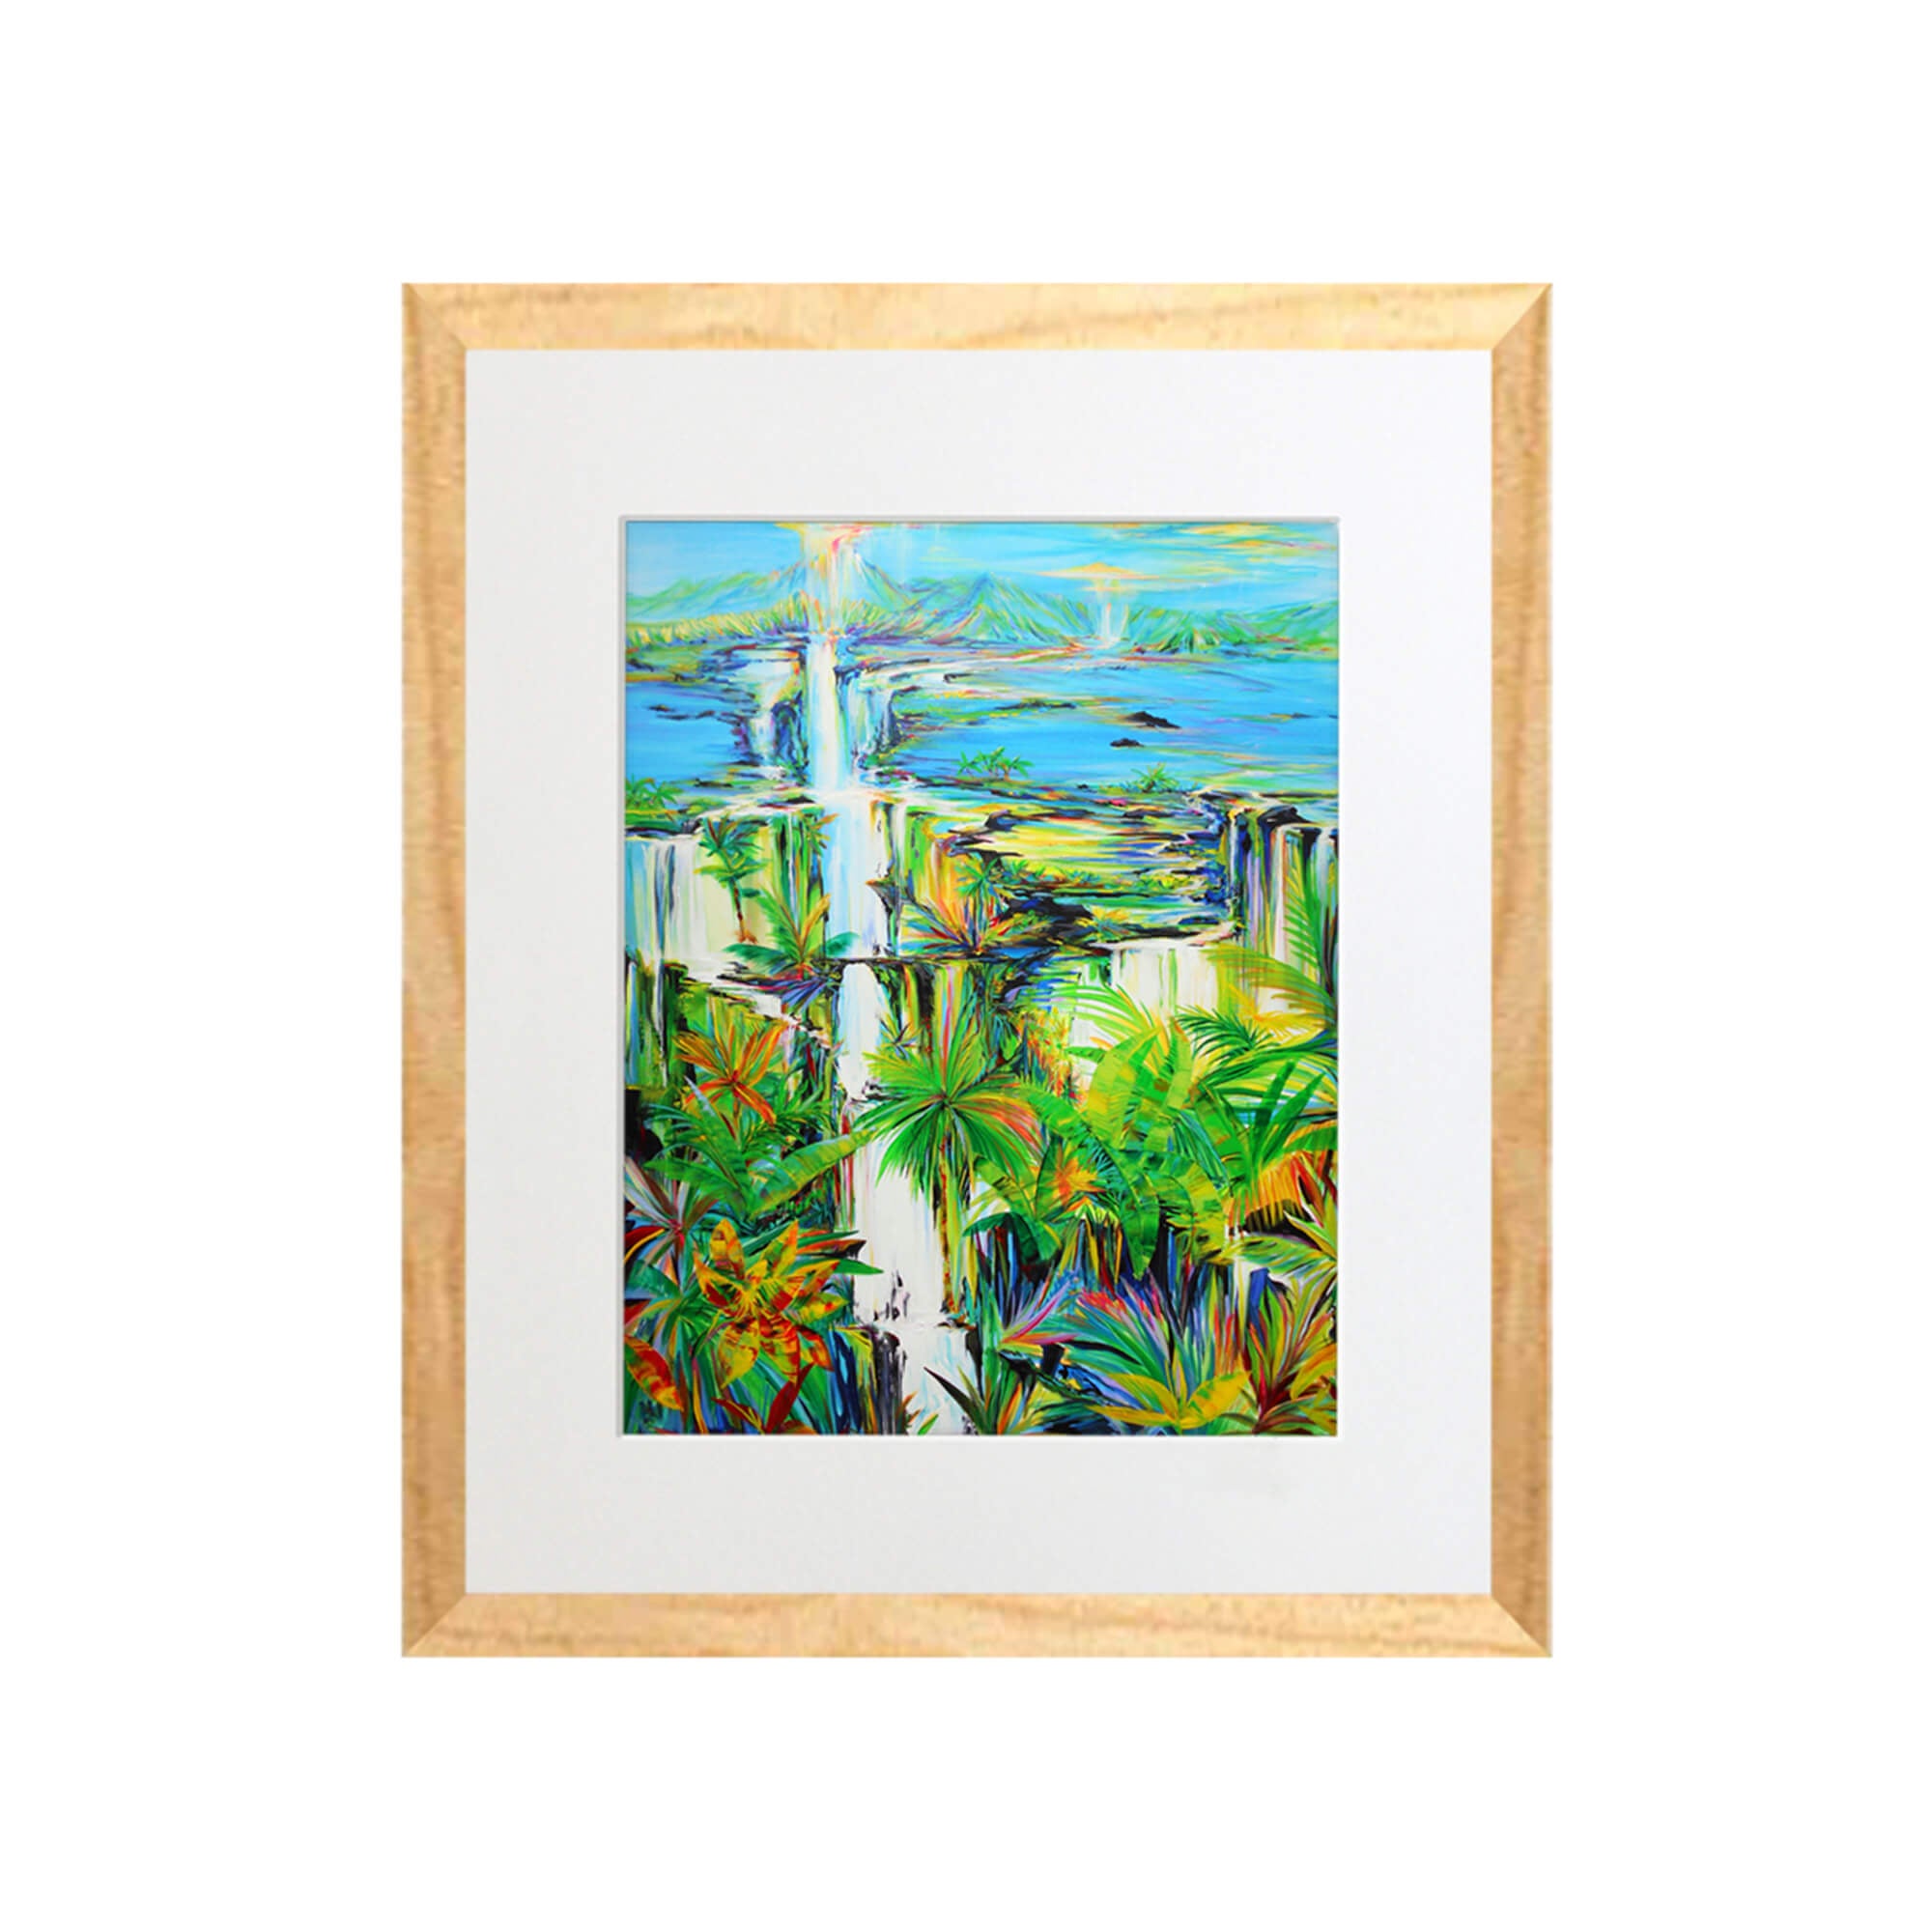 A landscape with distant mountains and waterfalls by Hawaii artist Jess Burda